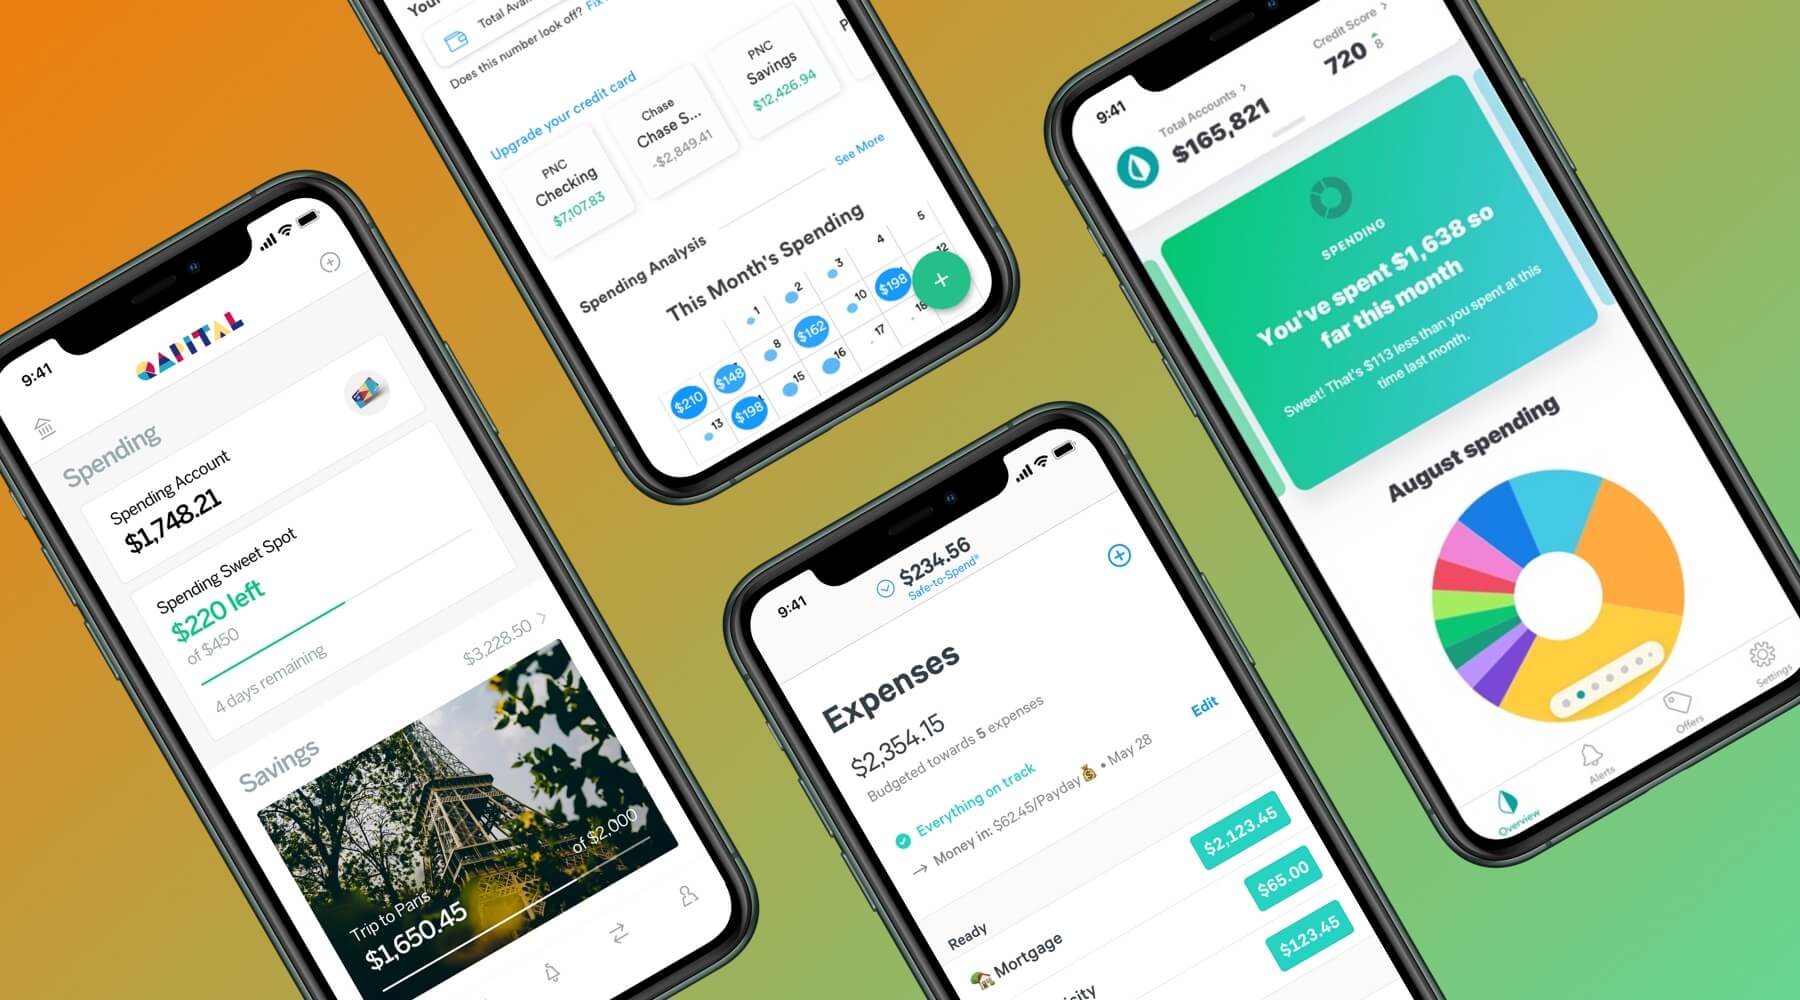 Best financial planning and saving apps of 2019